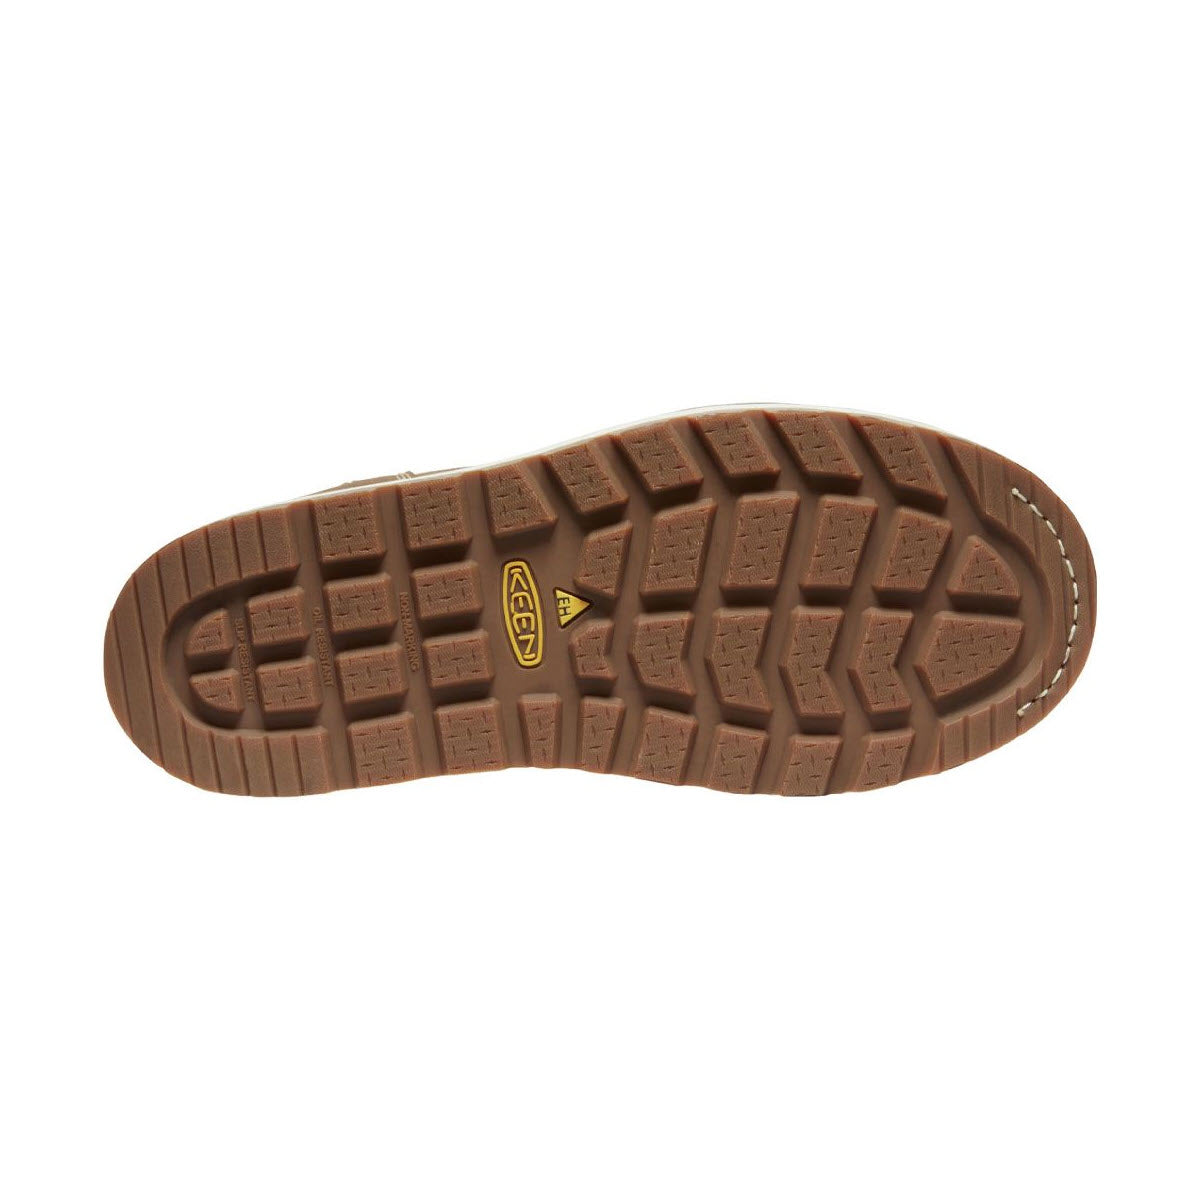 Bottom view of a brown Keen shoe sole with a herringbone tread pattern and a rectangular logo at the center, featuring an air-infused PU midsole.